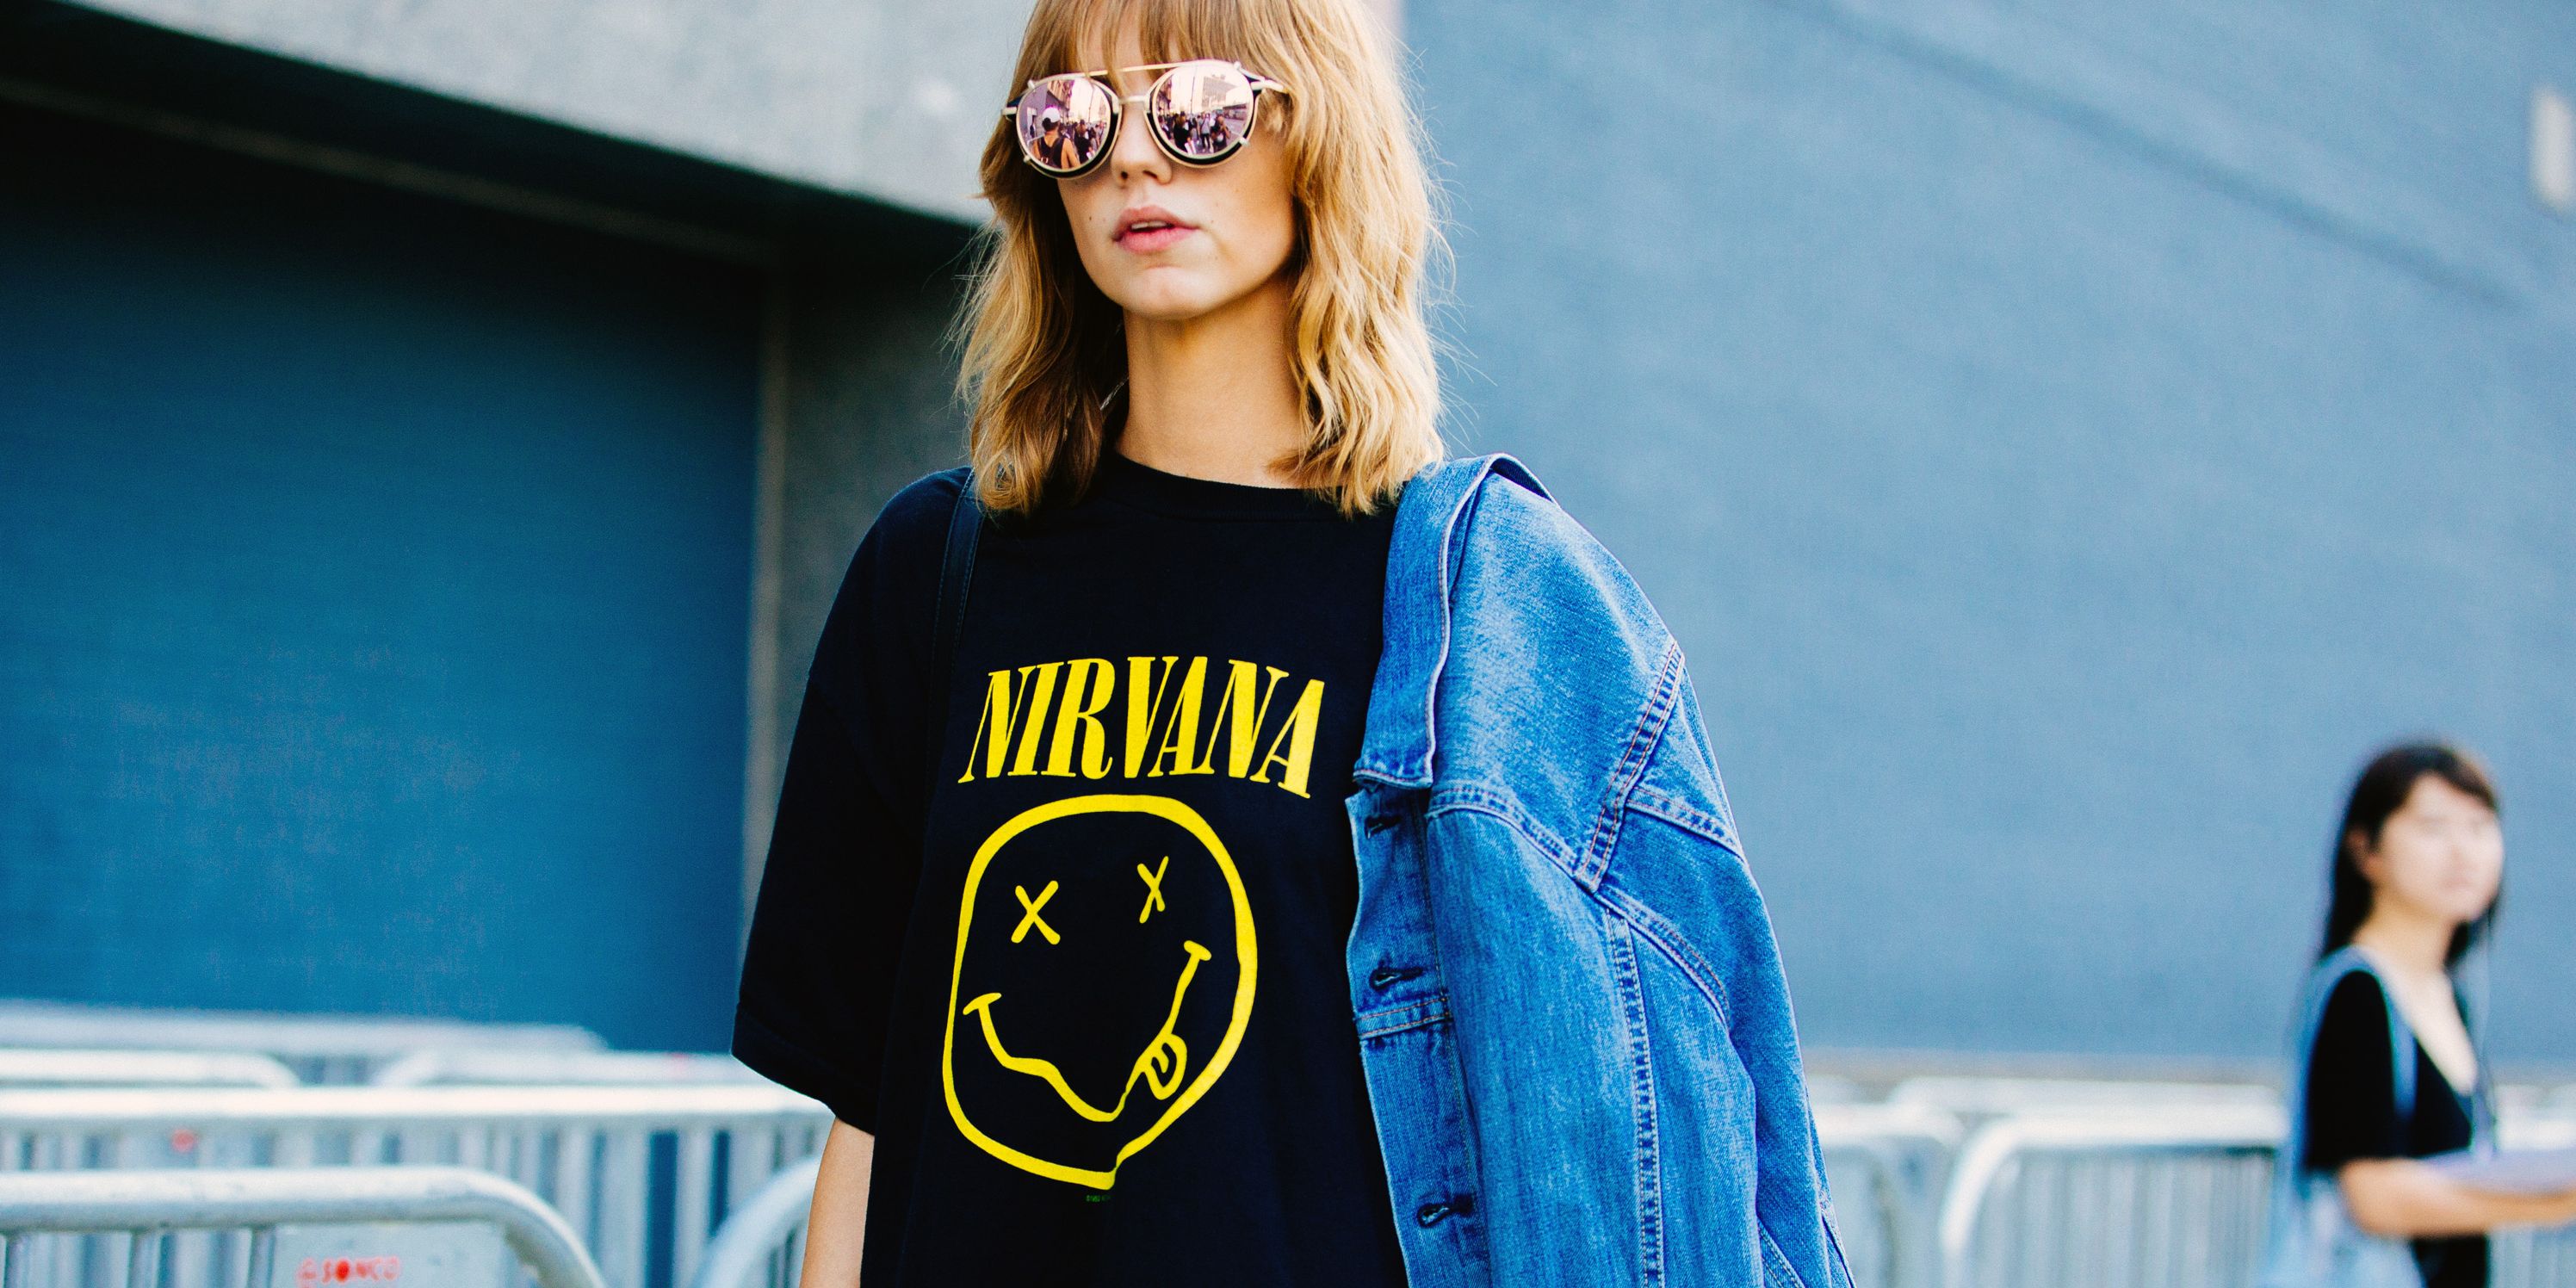 21 of Our Favorite T-Shirts for Everyday Wear, Going Braless, & More